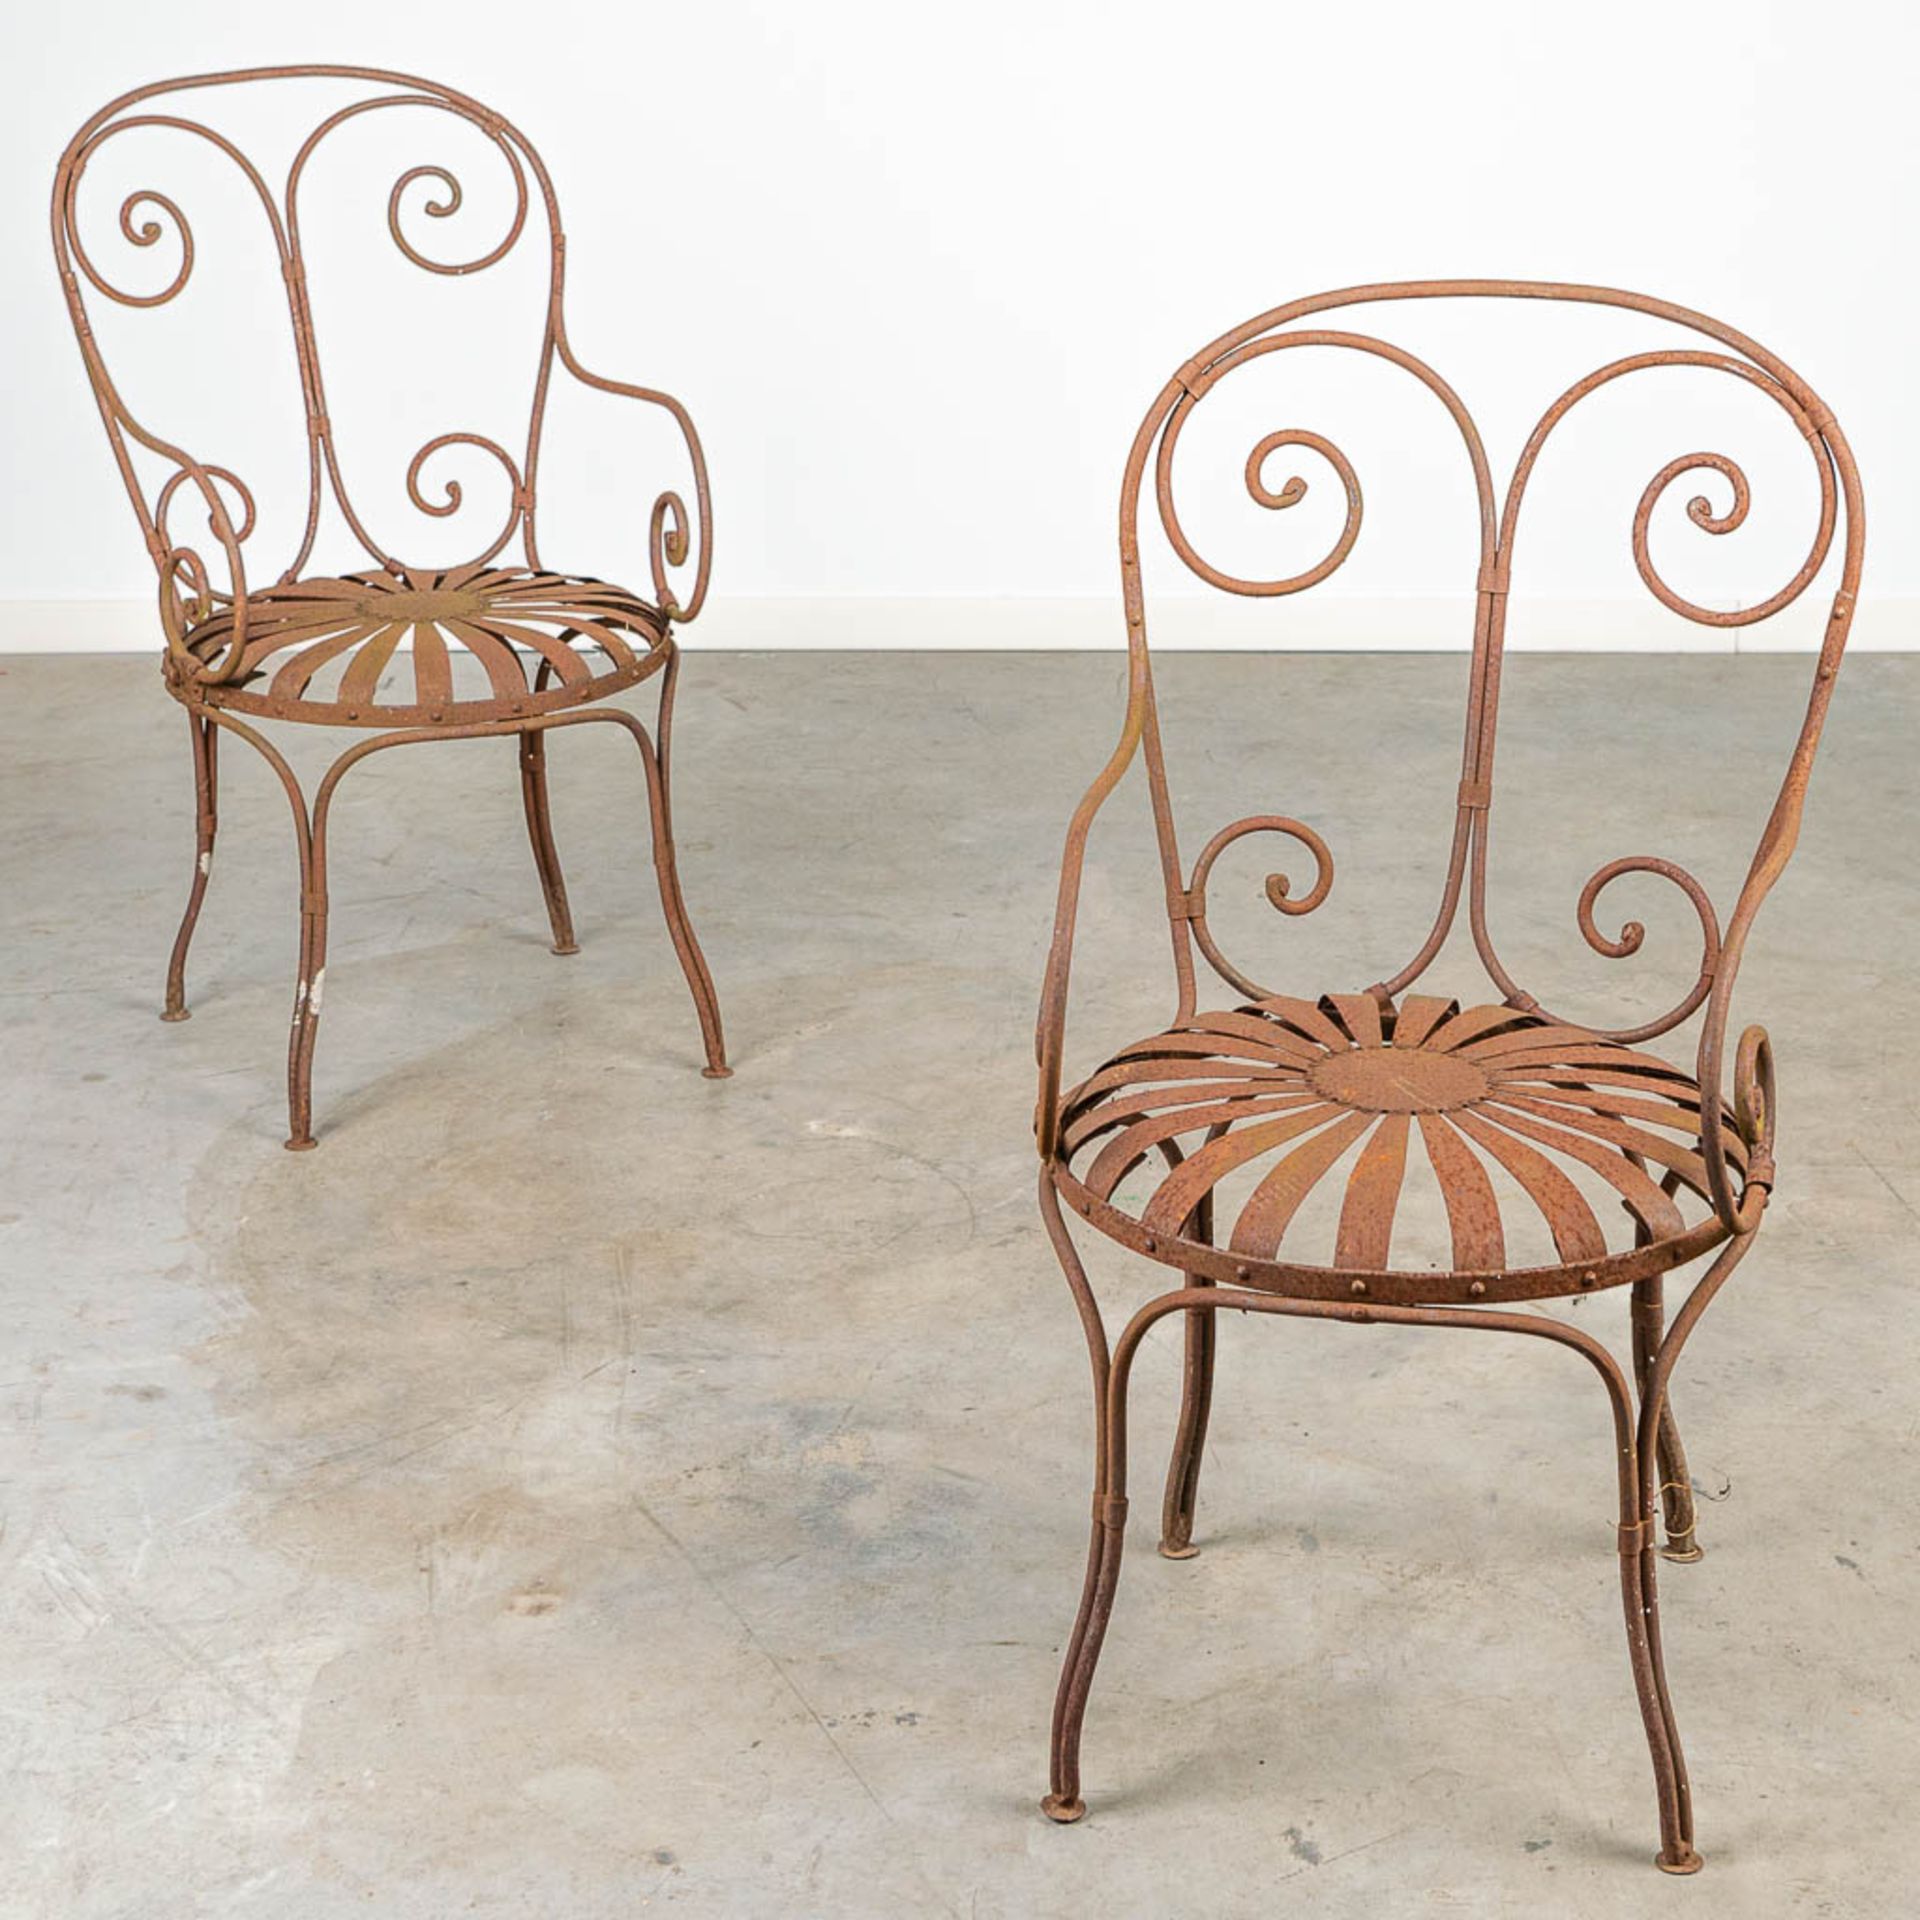 A pair of garden chairs made of wrought iron.